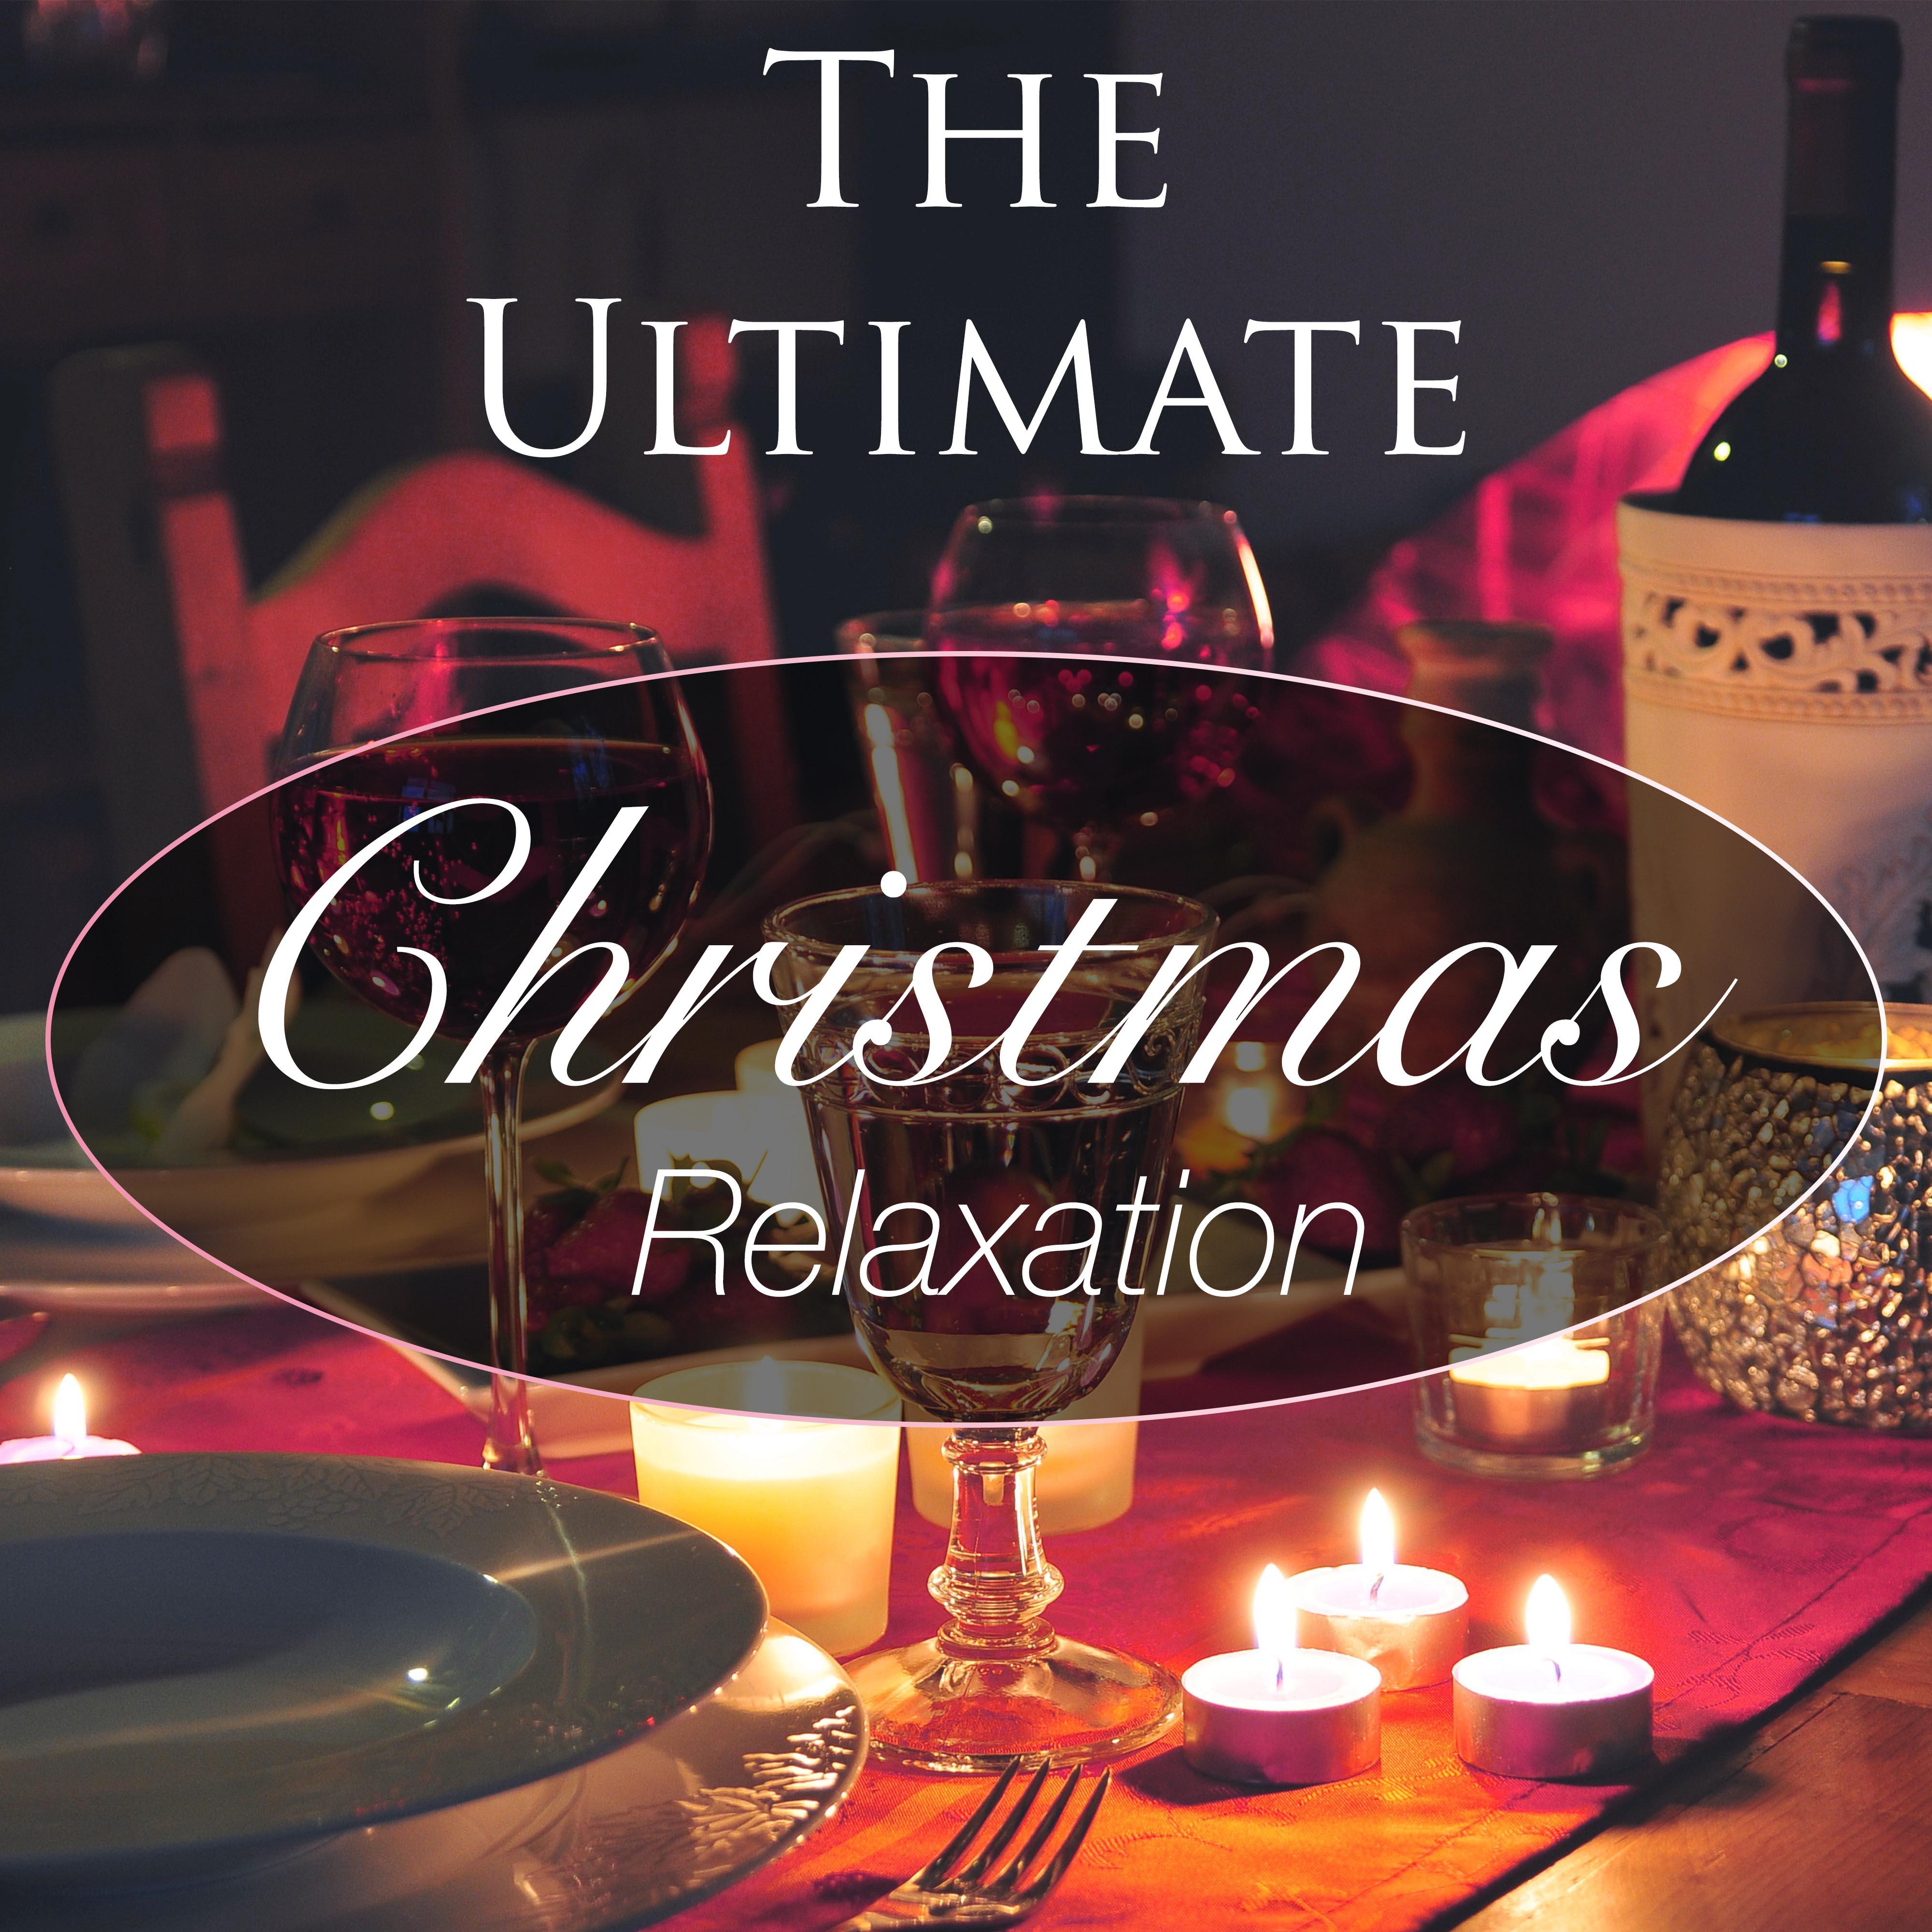 The Ultimate Christmas Relaxation - Extremely Soothing Piano Songs for Christmas Holidays to help you Relax and Soothe the Mind